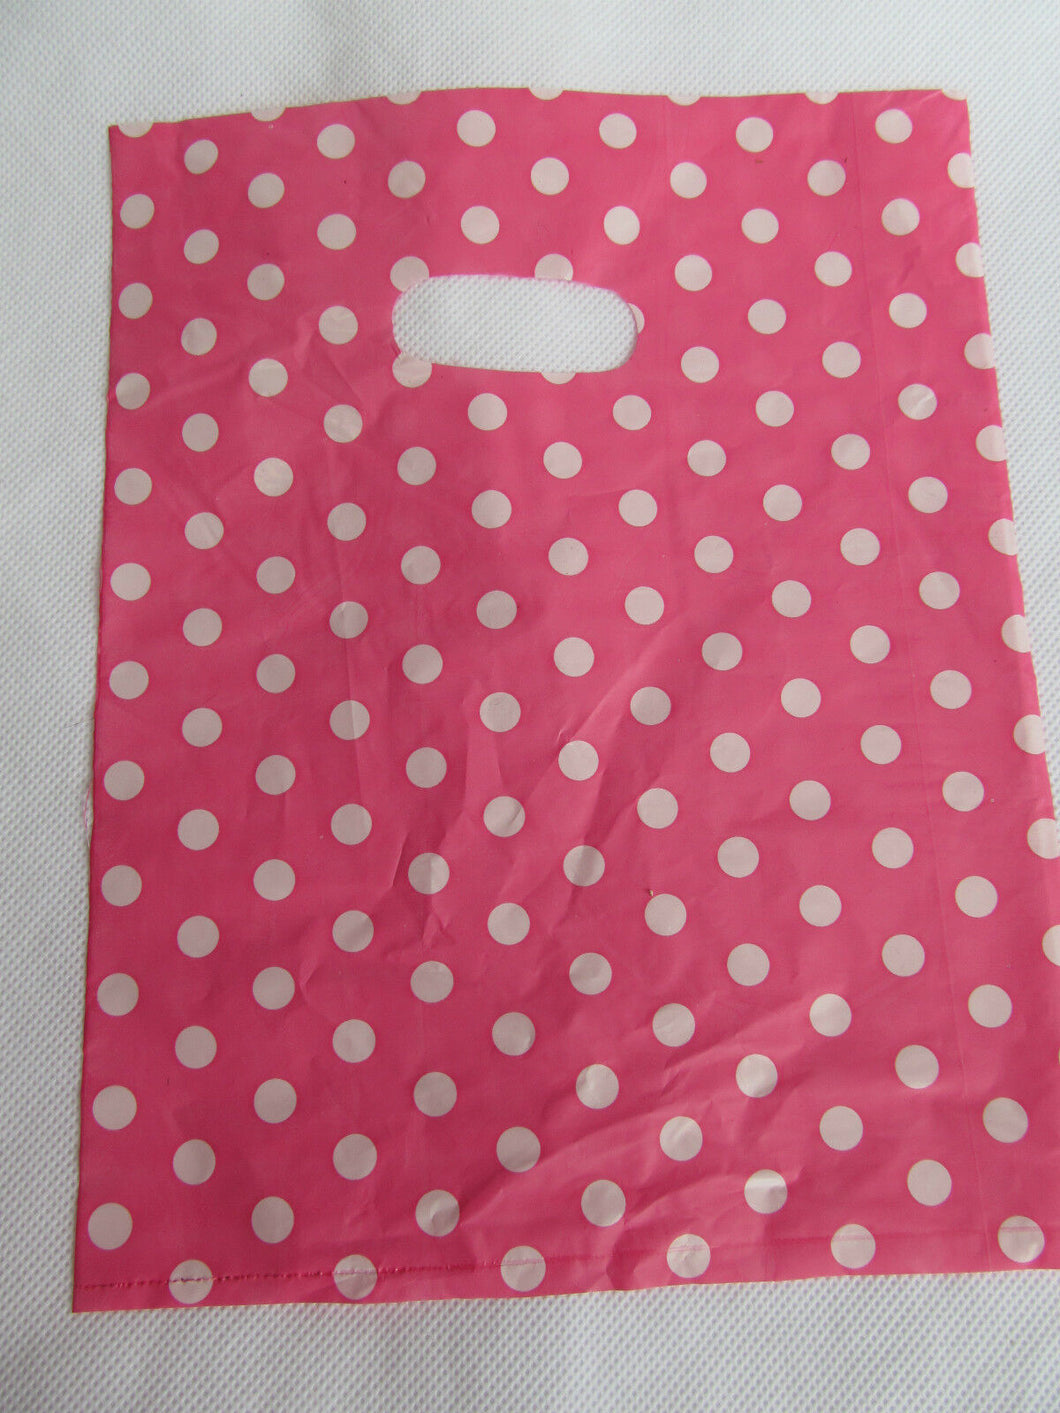 2 SIZES: SPOTTED PINK POLKA DOTS FASHION SHOP MARKET CARRIER BAGS 40+ PER PACK